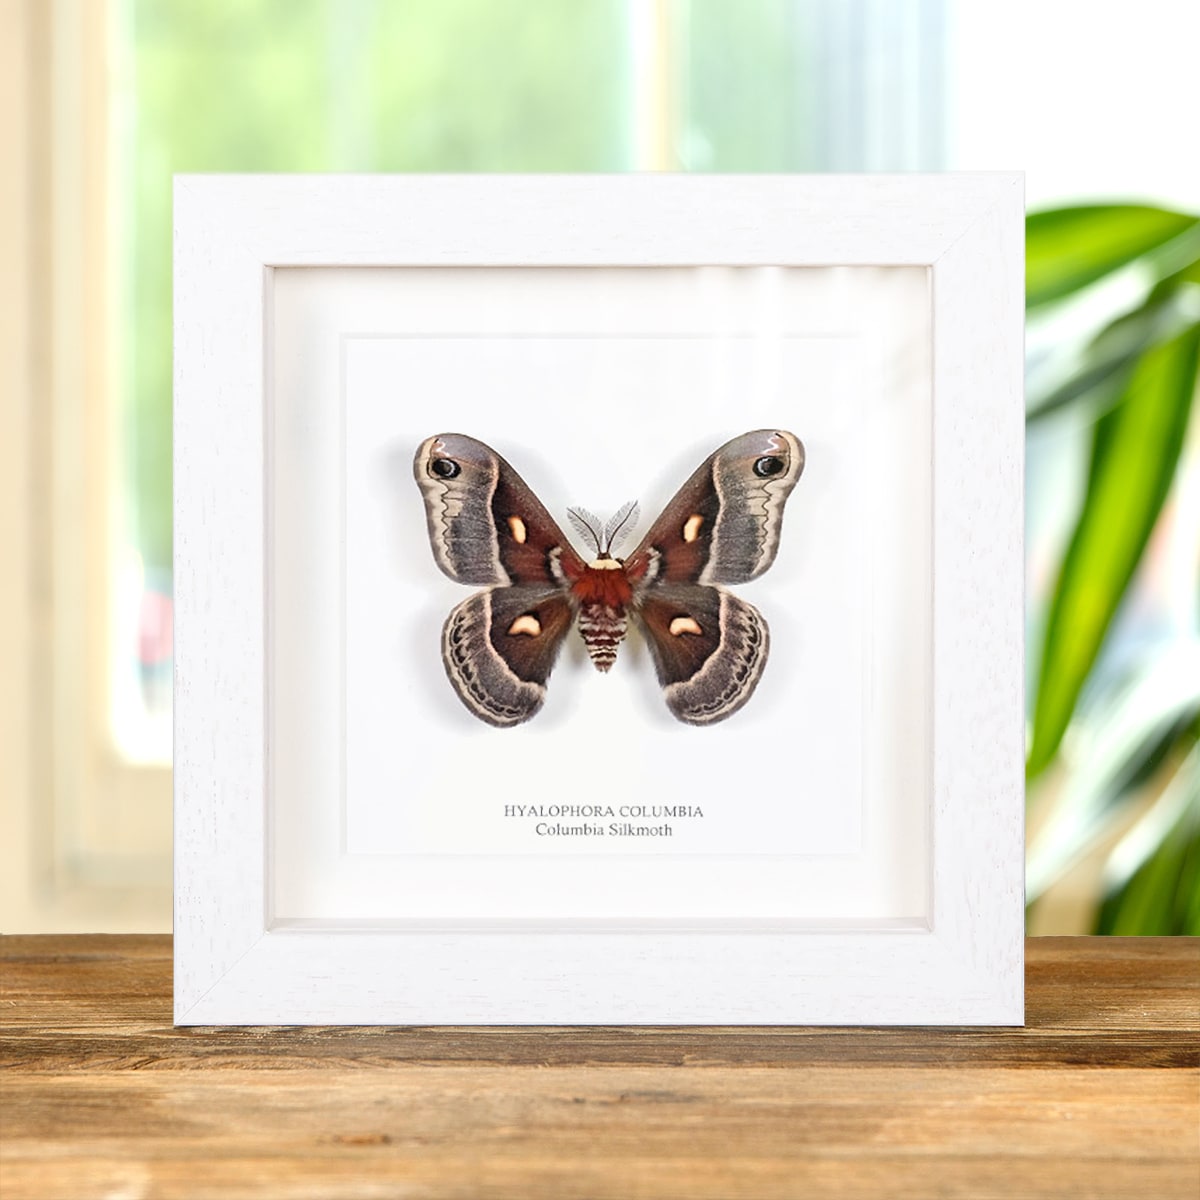 Columbia Silkmoth in Box Frame (Hyalophora columbia)